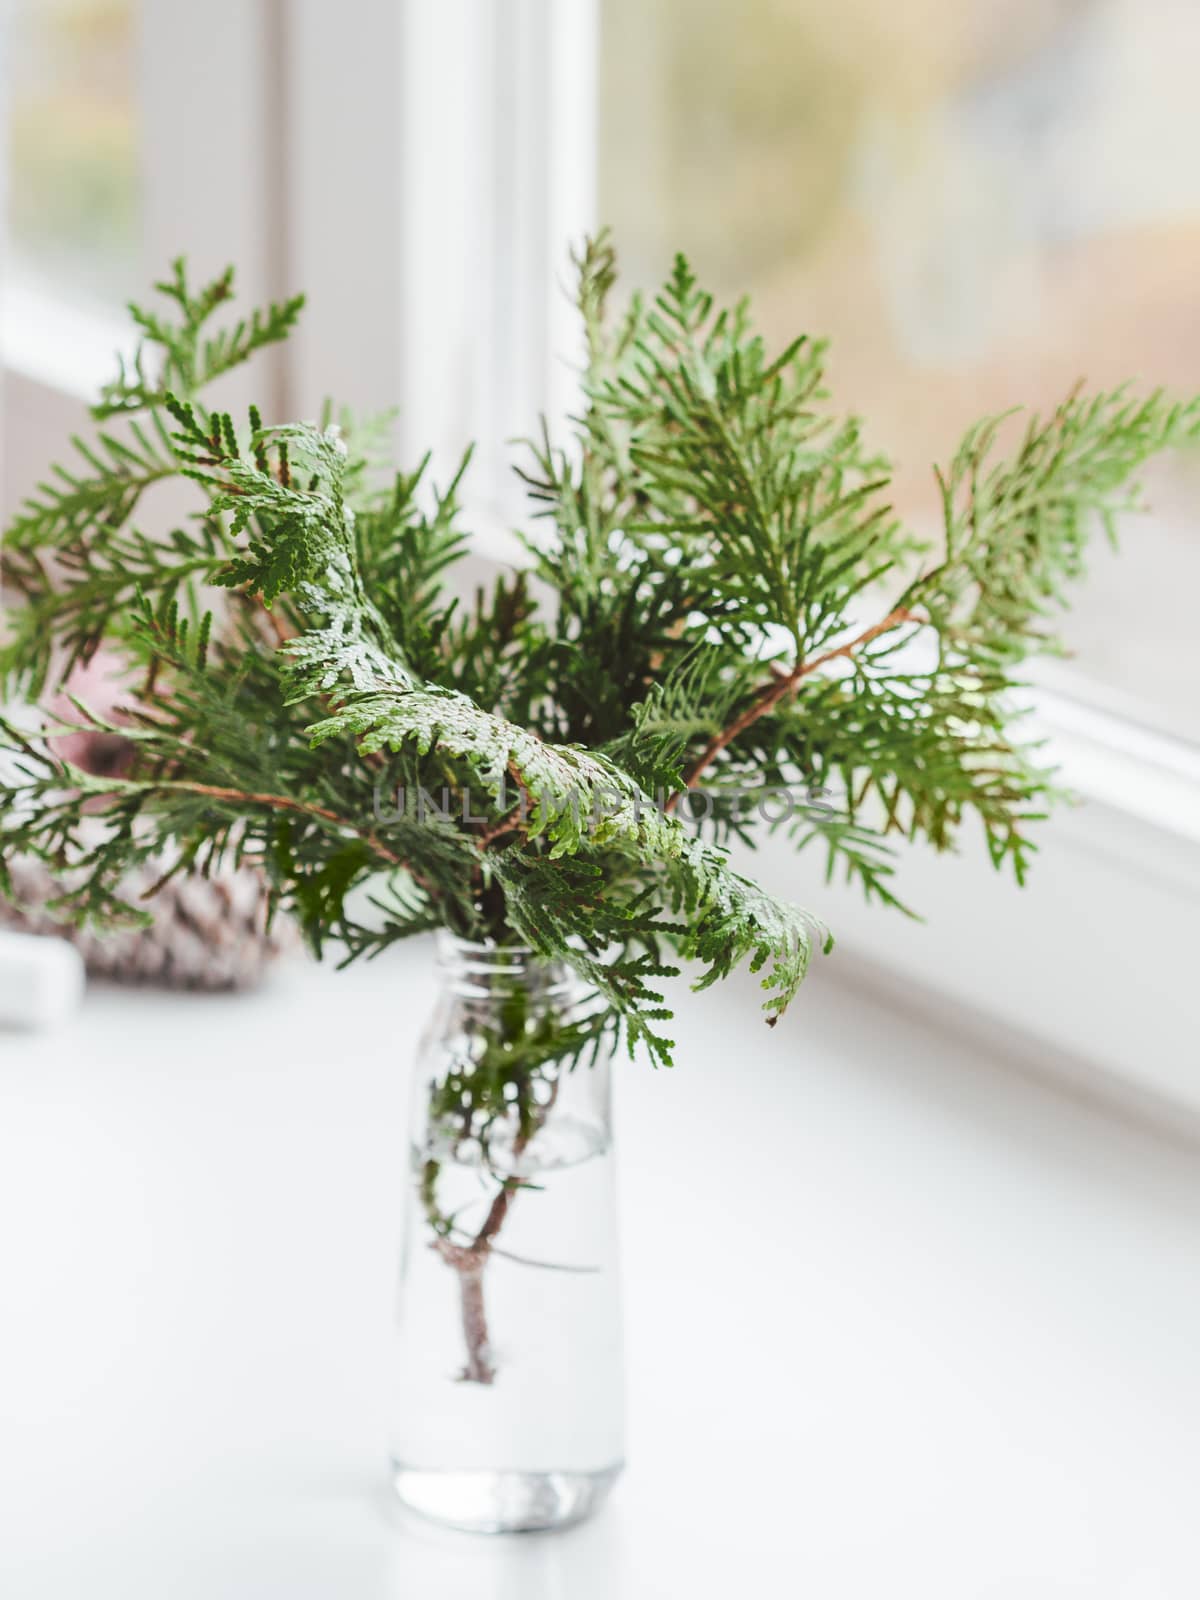 Vase with thuja branches stands on window sill. Sustainable alternative for Christmas tree. Caring for nature. Refusal to cut down spruce forests. New Year celebration.